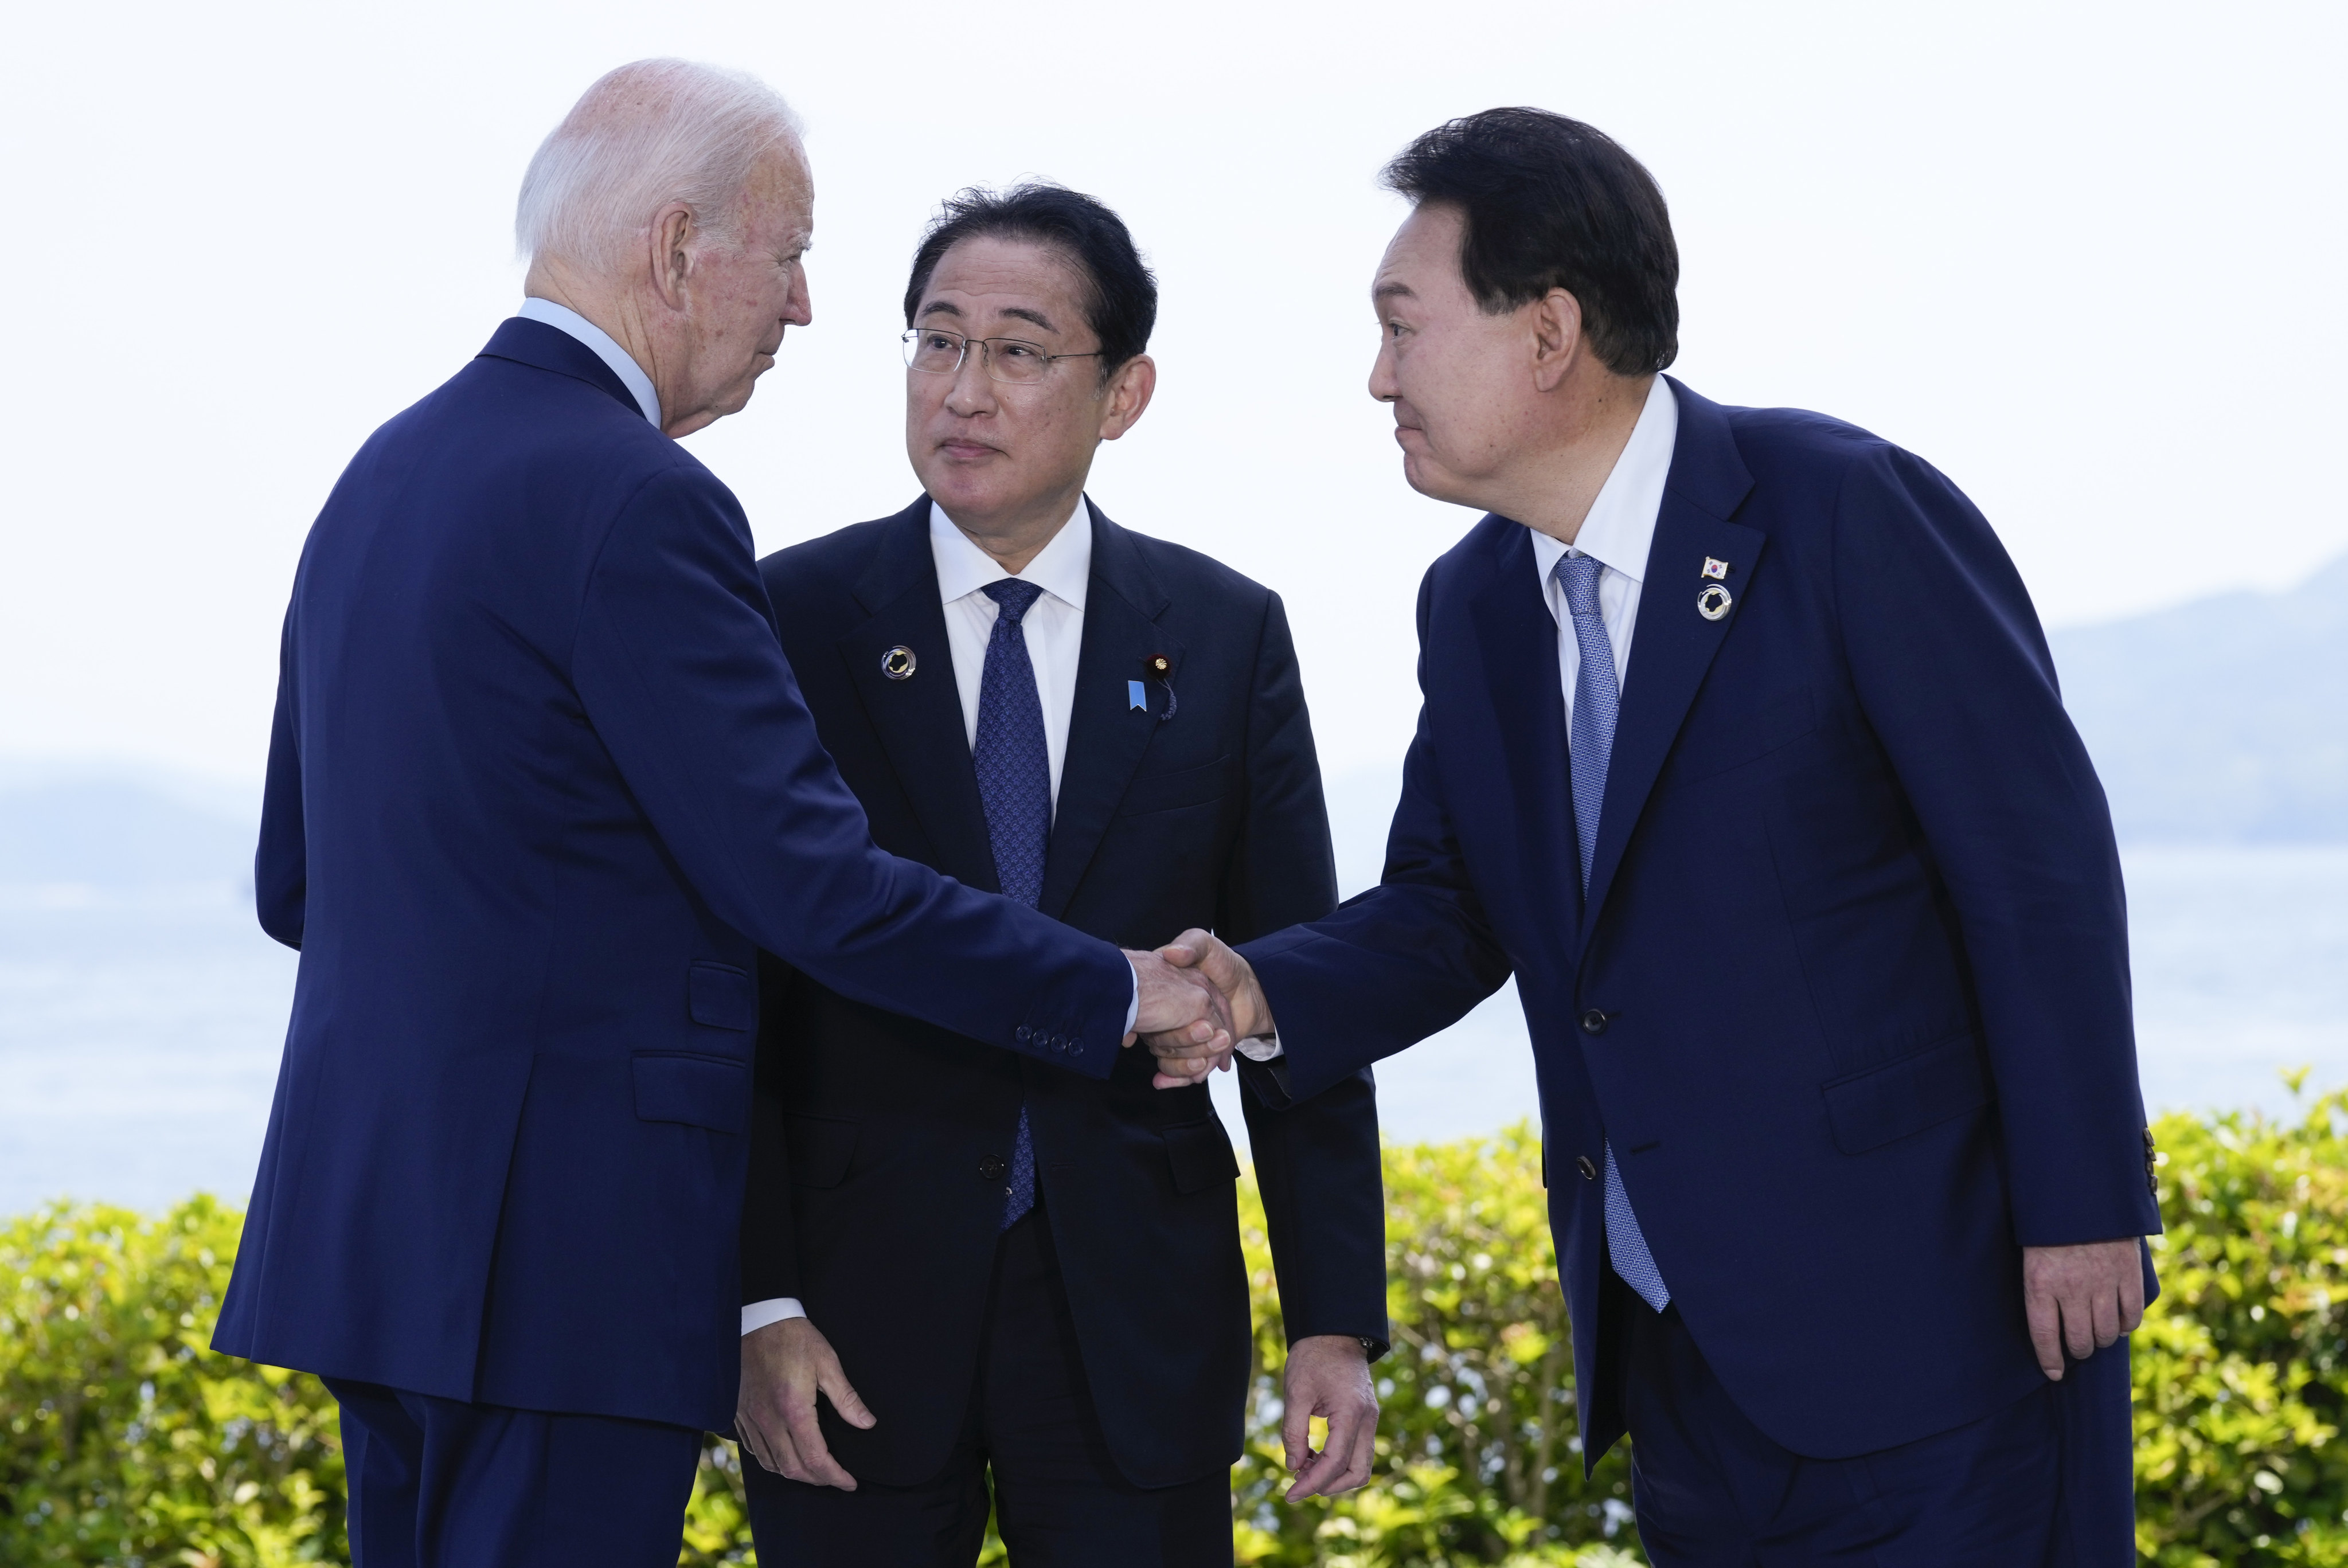 US President Joe Biden shakes hands with South Korean President Yoon Suk-yeol as Japanese Prime Minister Fumio Kishida watches, ahead of a trilateral meeting on the sidelines of the G7 summit in Hiroshima on May 21. The summit has focused on Ukraine, as well as China. Photo: AP 